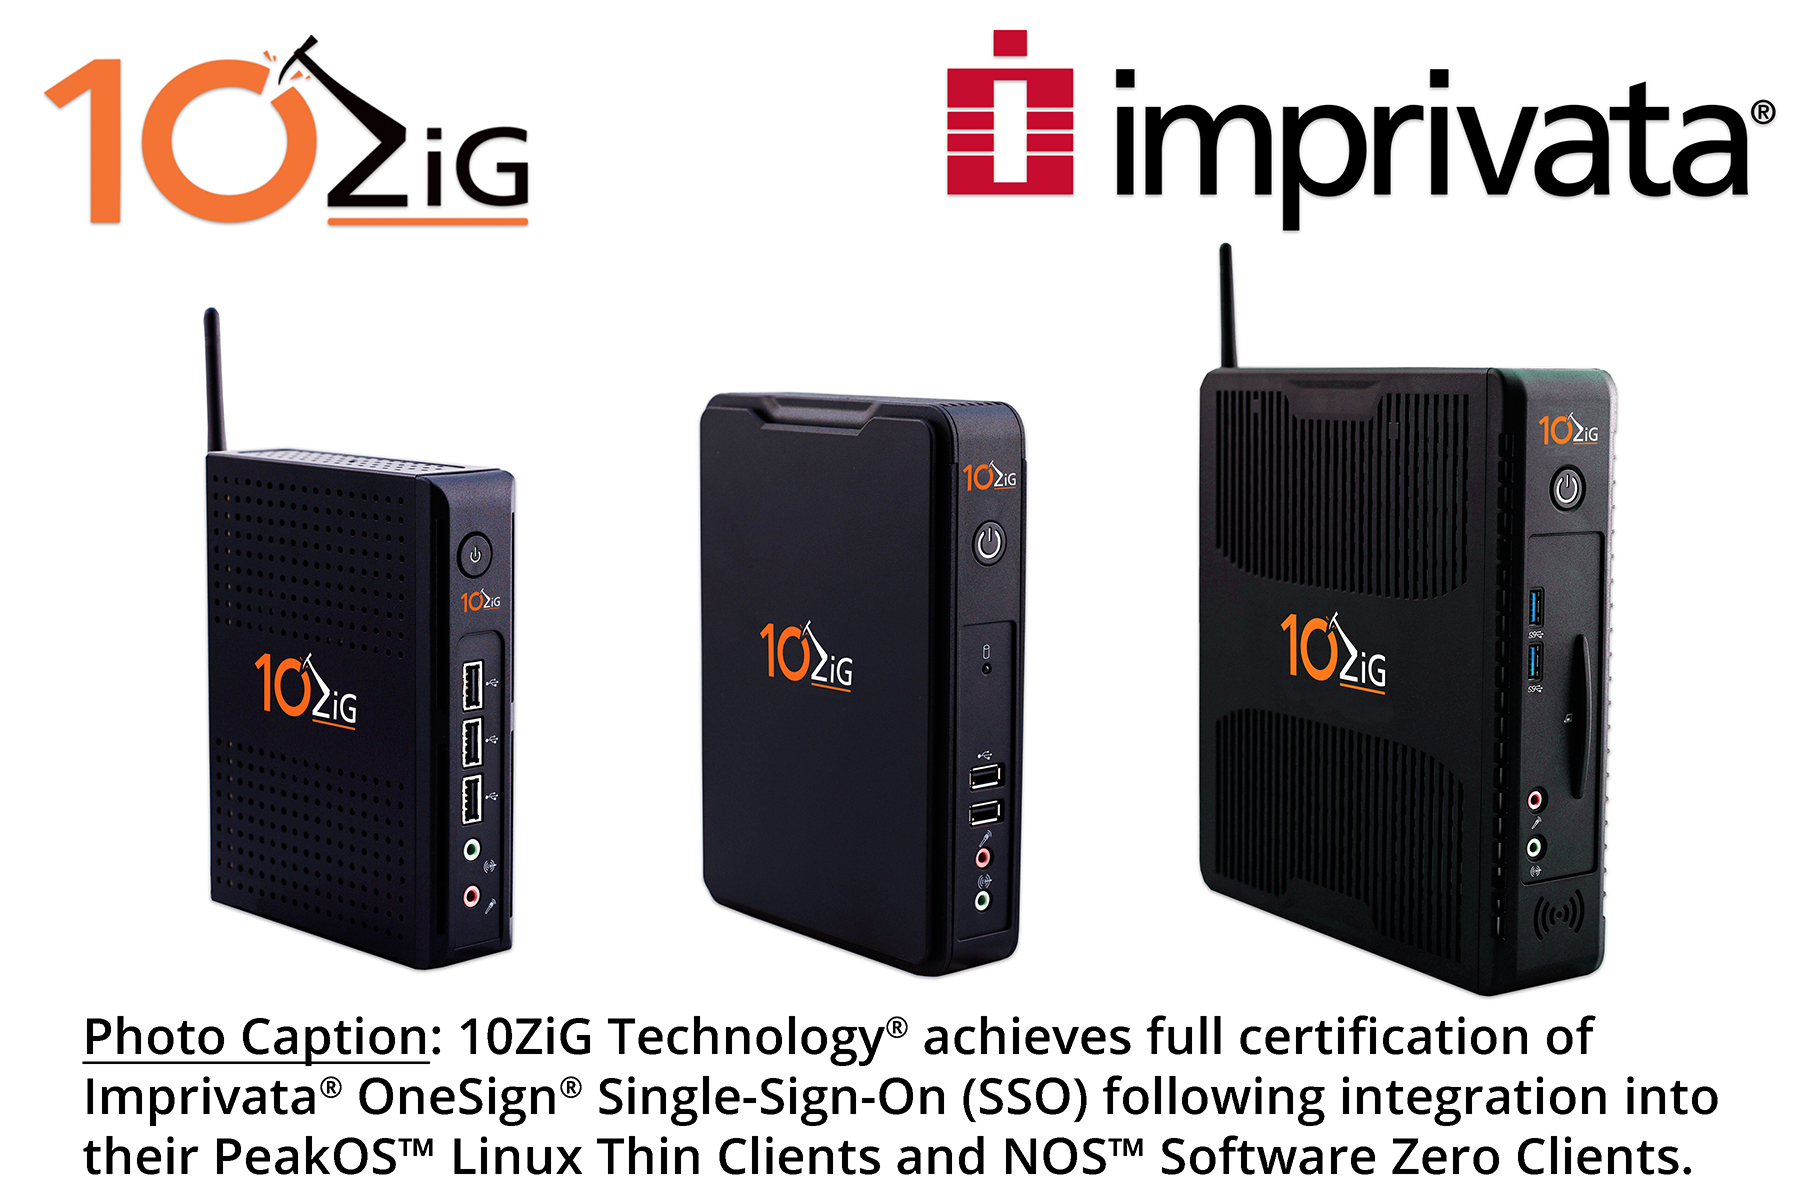 10ZiG Technology® achieves full certification of Imprivata® OneSign® Single-Sign-On (SSO) following integration into their PeakOS™ Linux Thin Clients and NOS™ Software Zero Clients.